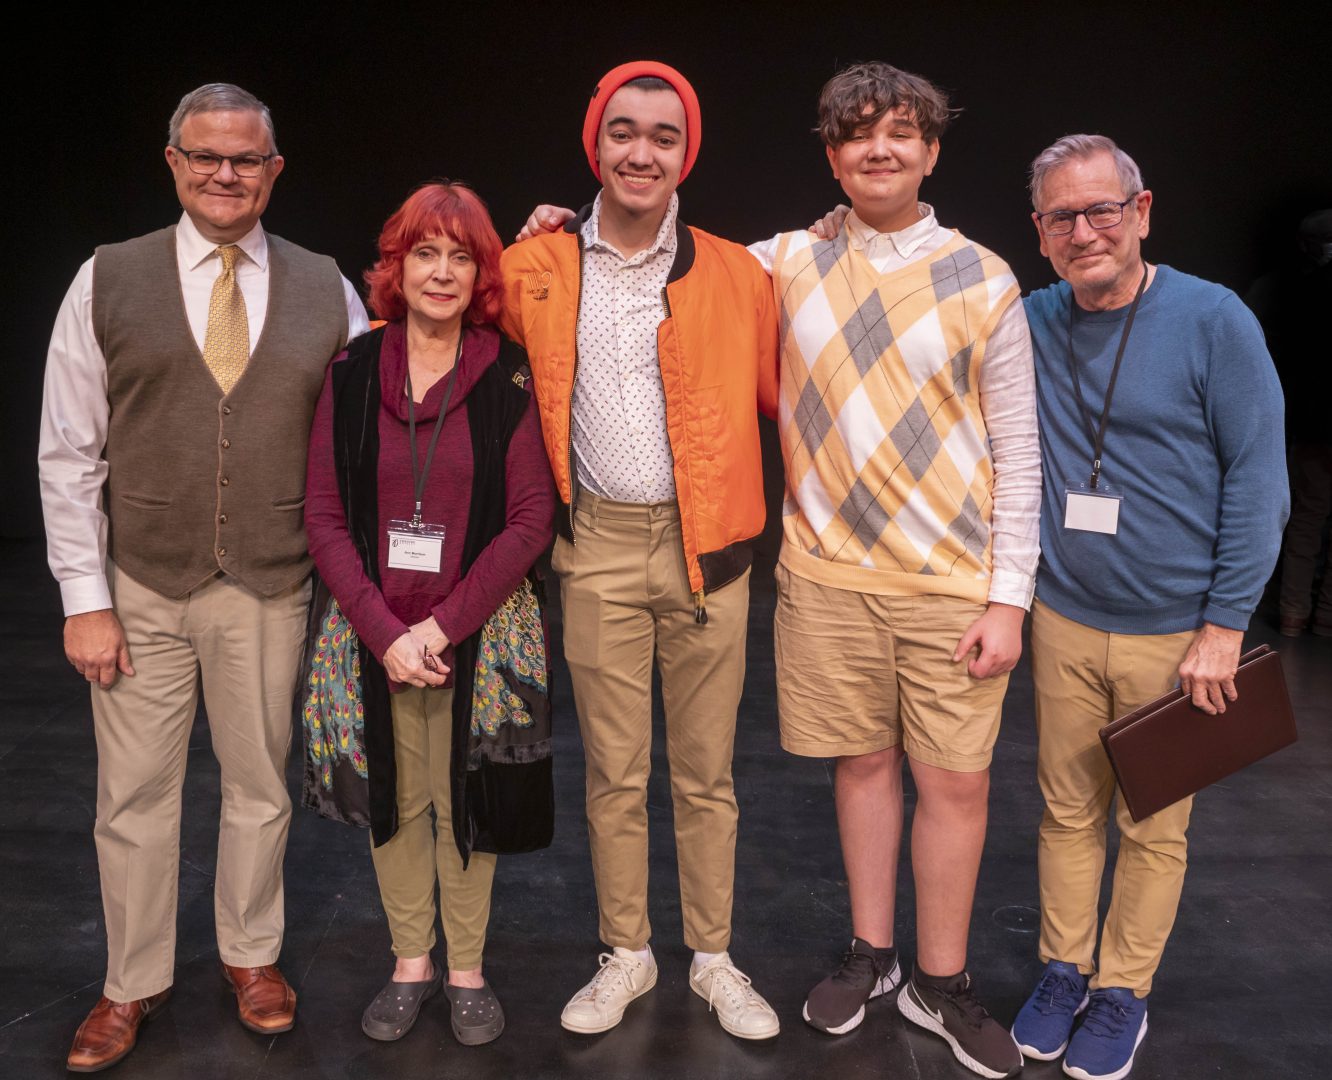 THE REAL WORLD—Tony Boothby, Ann Morrison, Jude DeMaio, Owen DeMaio and director Blake Walton. The play by Jake Pettingell was awarded the Vernon Safran Prize.